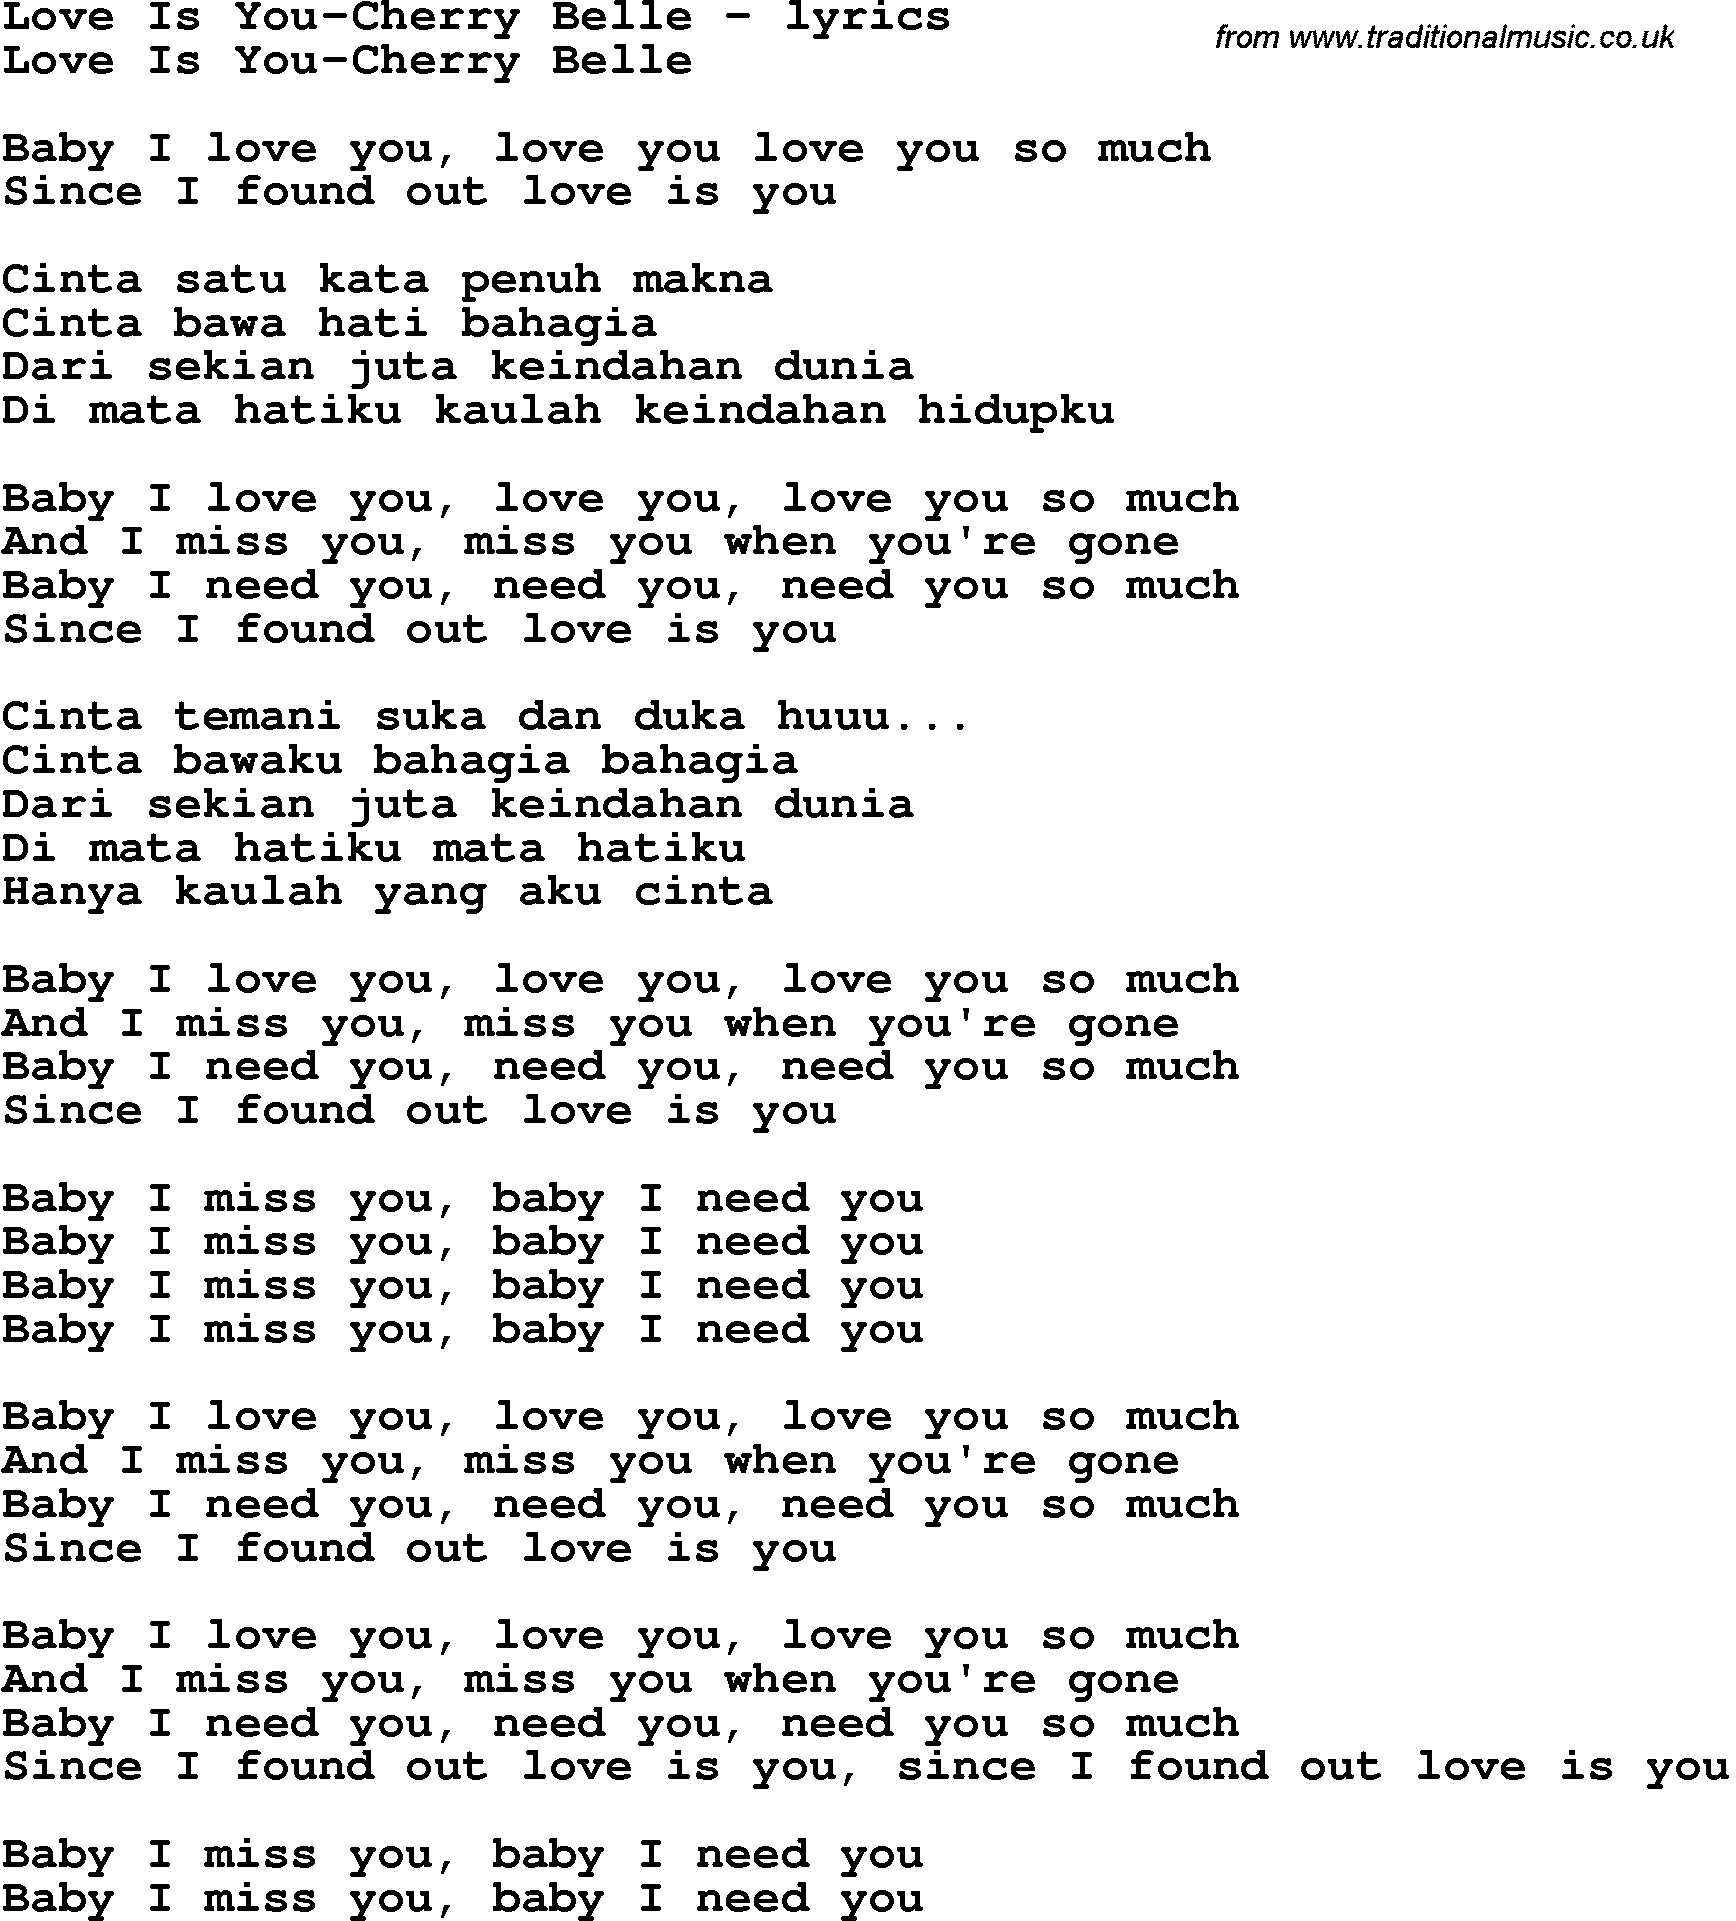 Love Song Lyrics for: Love Is You-Cherry Belle